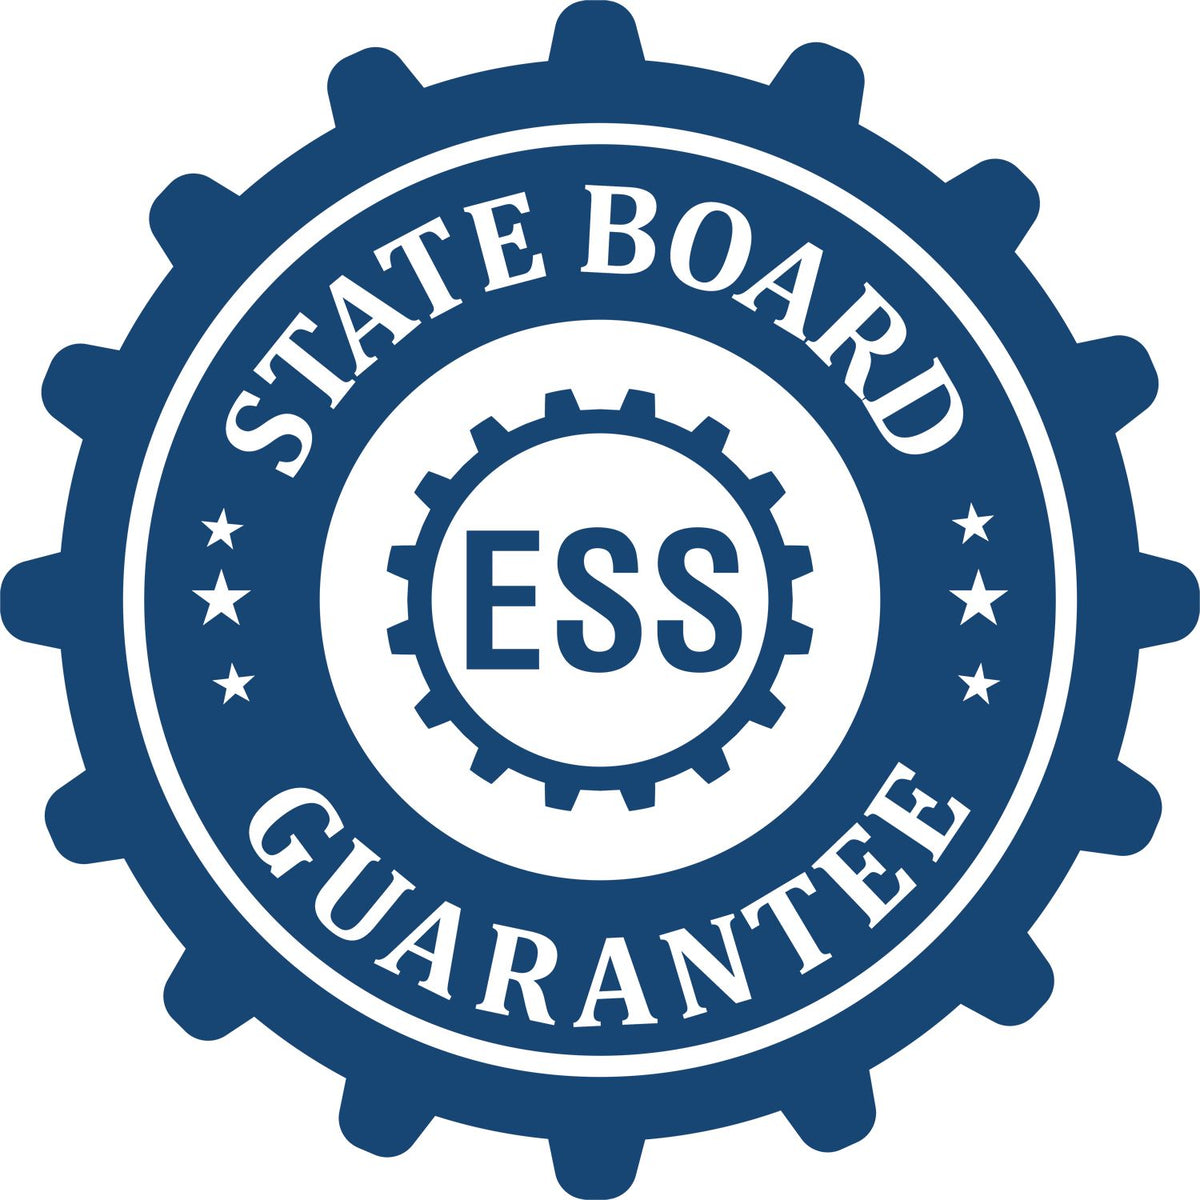 An emblem in a gear shape illustrating a state board guarantee for the Digital Alabama Landscape Architect Stamp product.